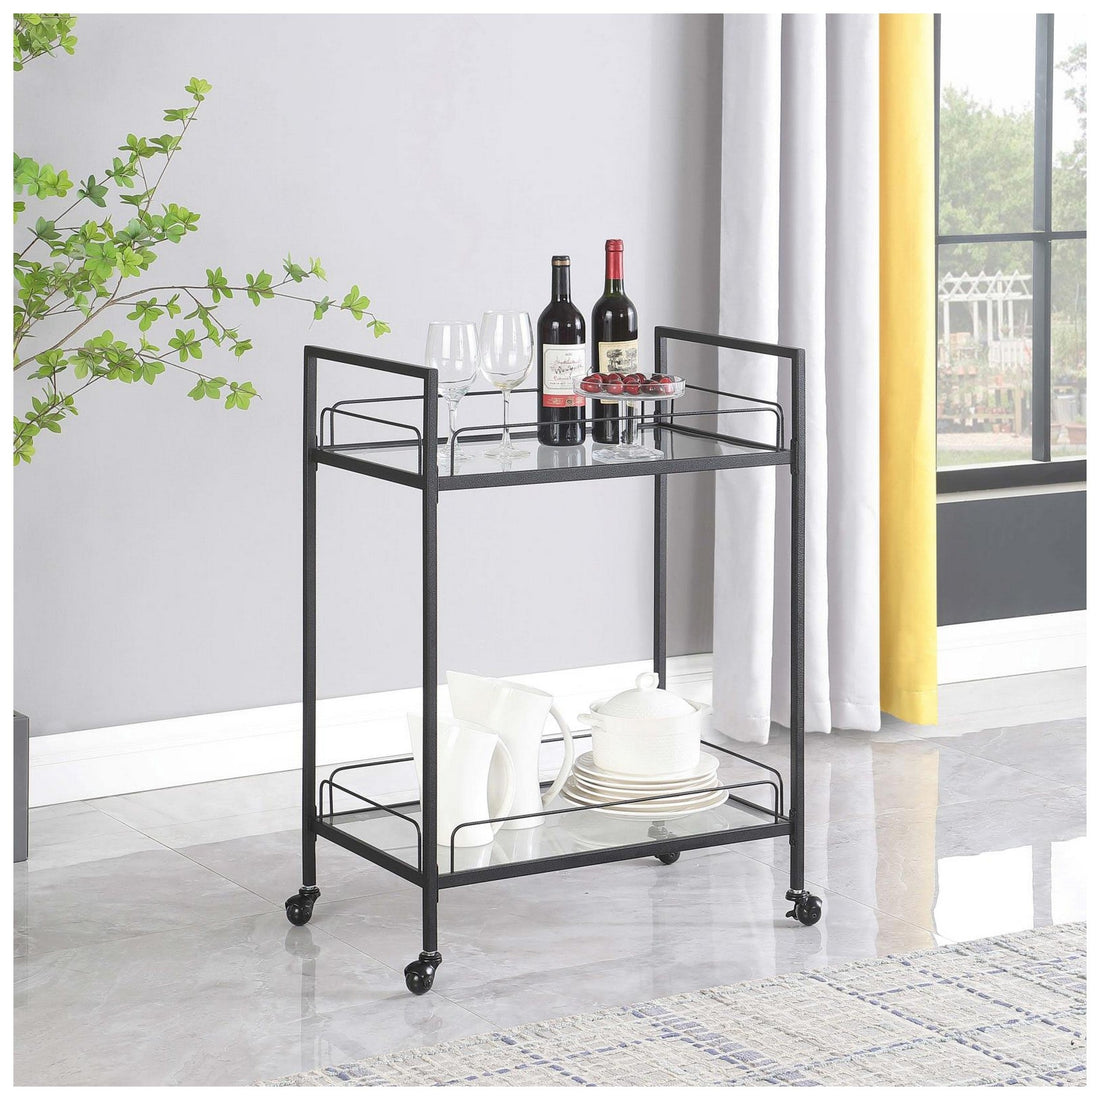 Curltis Serving Cart with Glass Shelves Clear and Black 181065